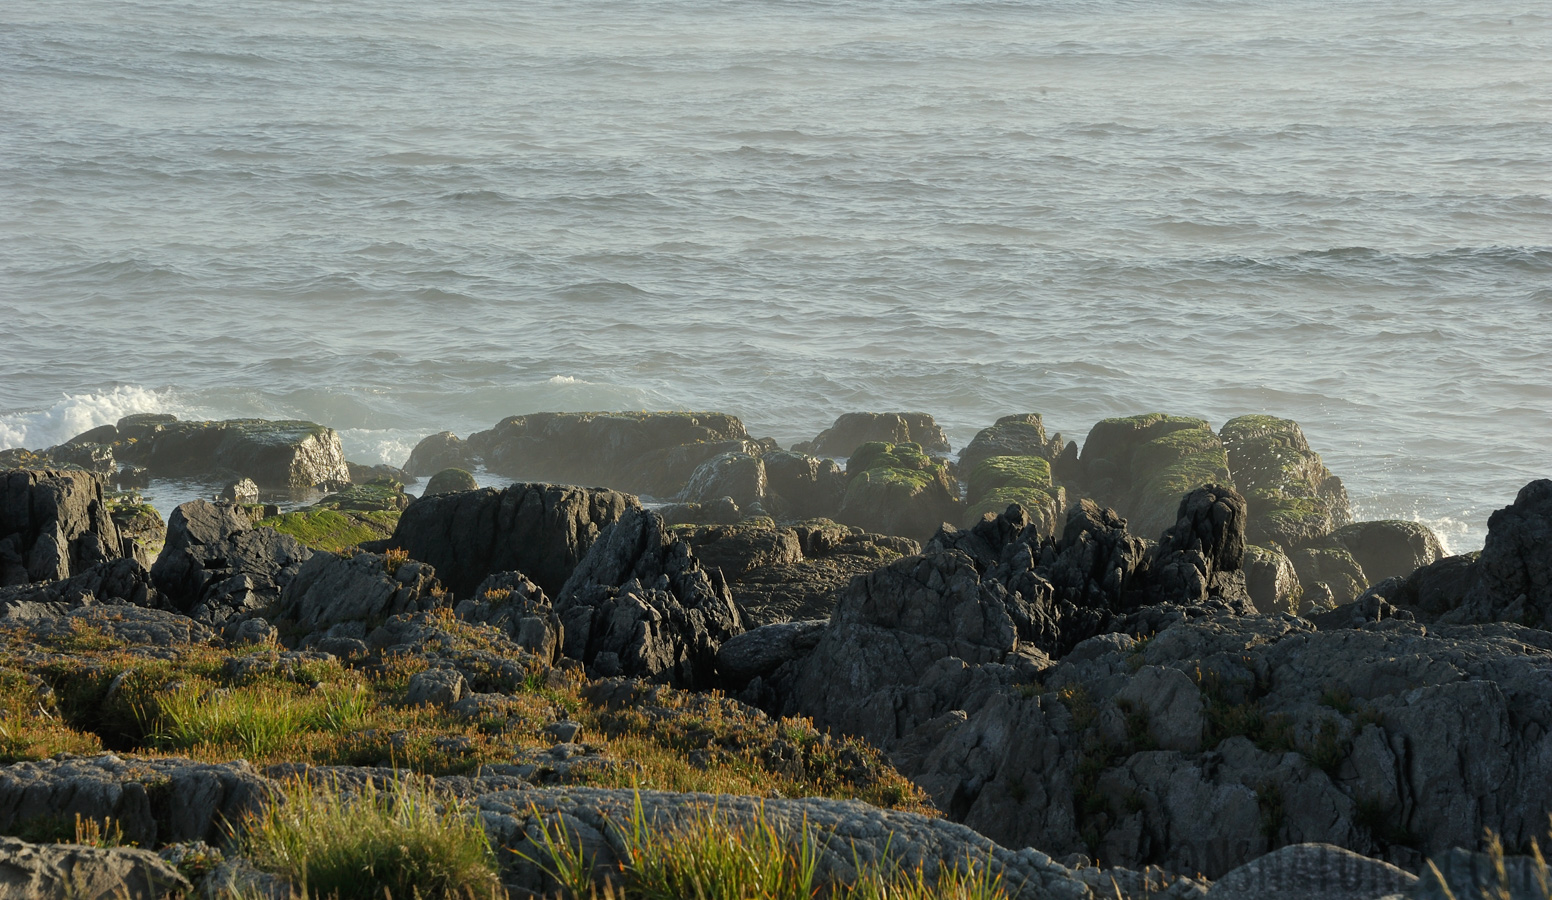 Coast west of Port aux Basques [170 mm, 1/125 sec at f / 16, ISO 400]